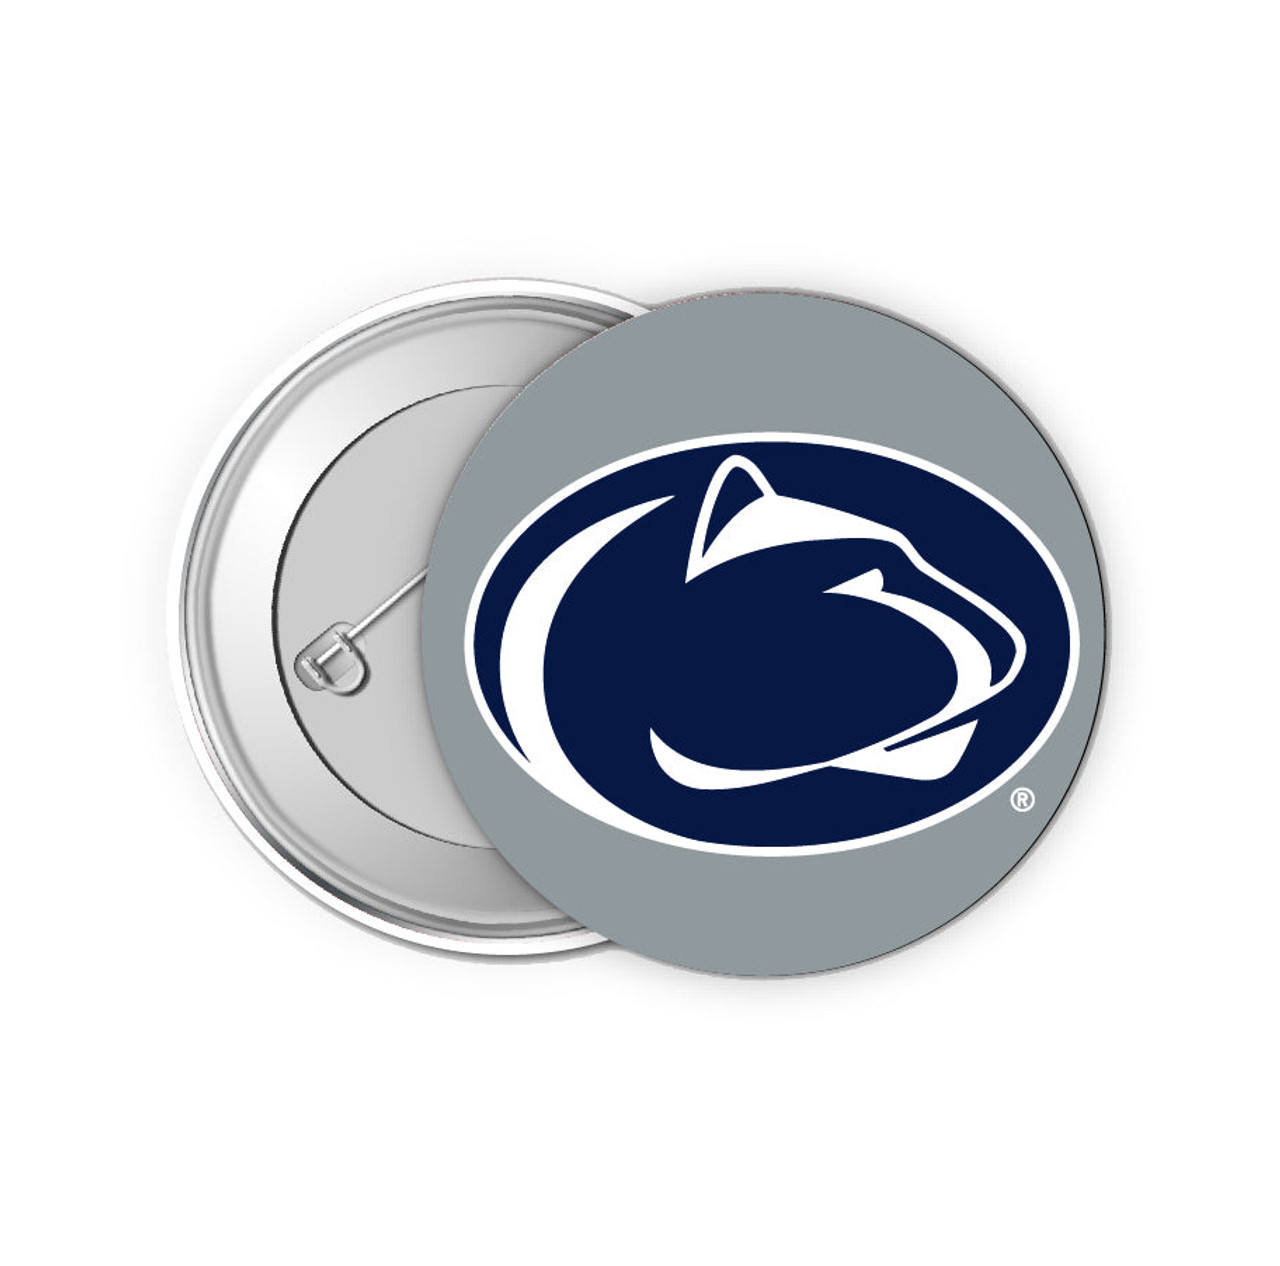 Penn State Nittany Lions 2 Inch Button Pin 4 Pack - College Fabric Store